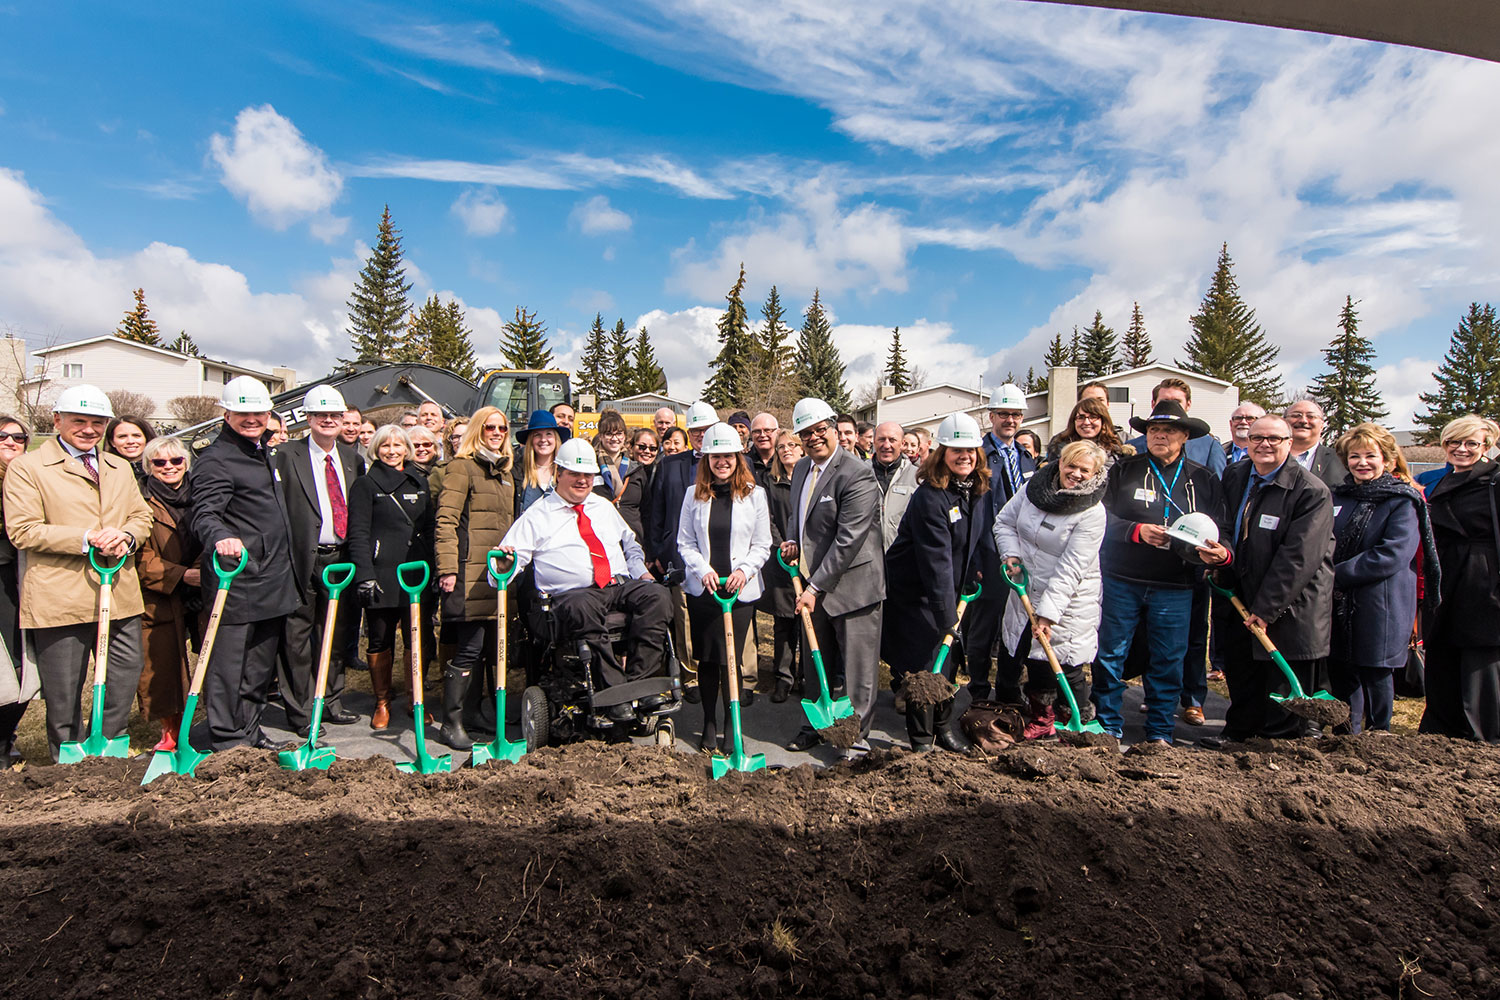 Calgary Centre MP Kent Hehr, Alberta’s Minister of Seniors and Housing Lori Sigurdson, and Mayor Naheed Nenshi were all on hand at the ground-breaking event for Horizon Housing Society’s new 161-unit affordable housing development in Glamorgan in April.
Courtesy Horizon Housing Society